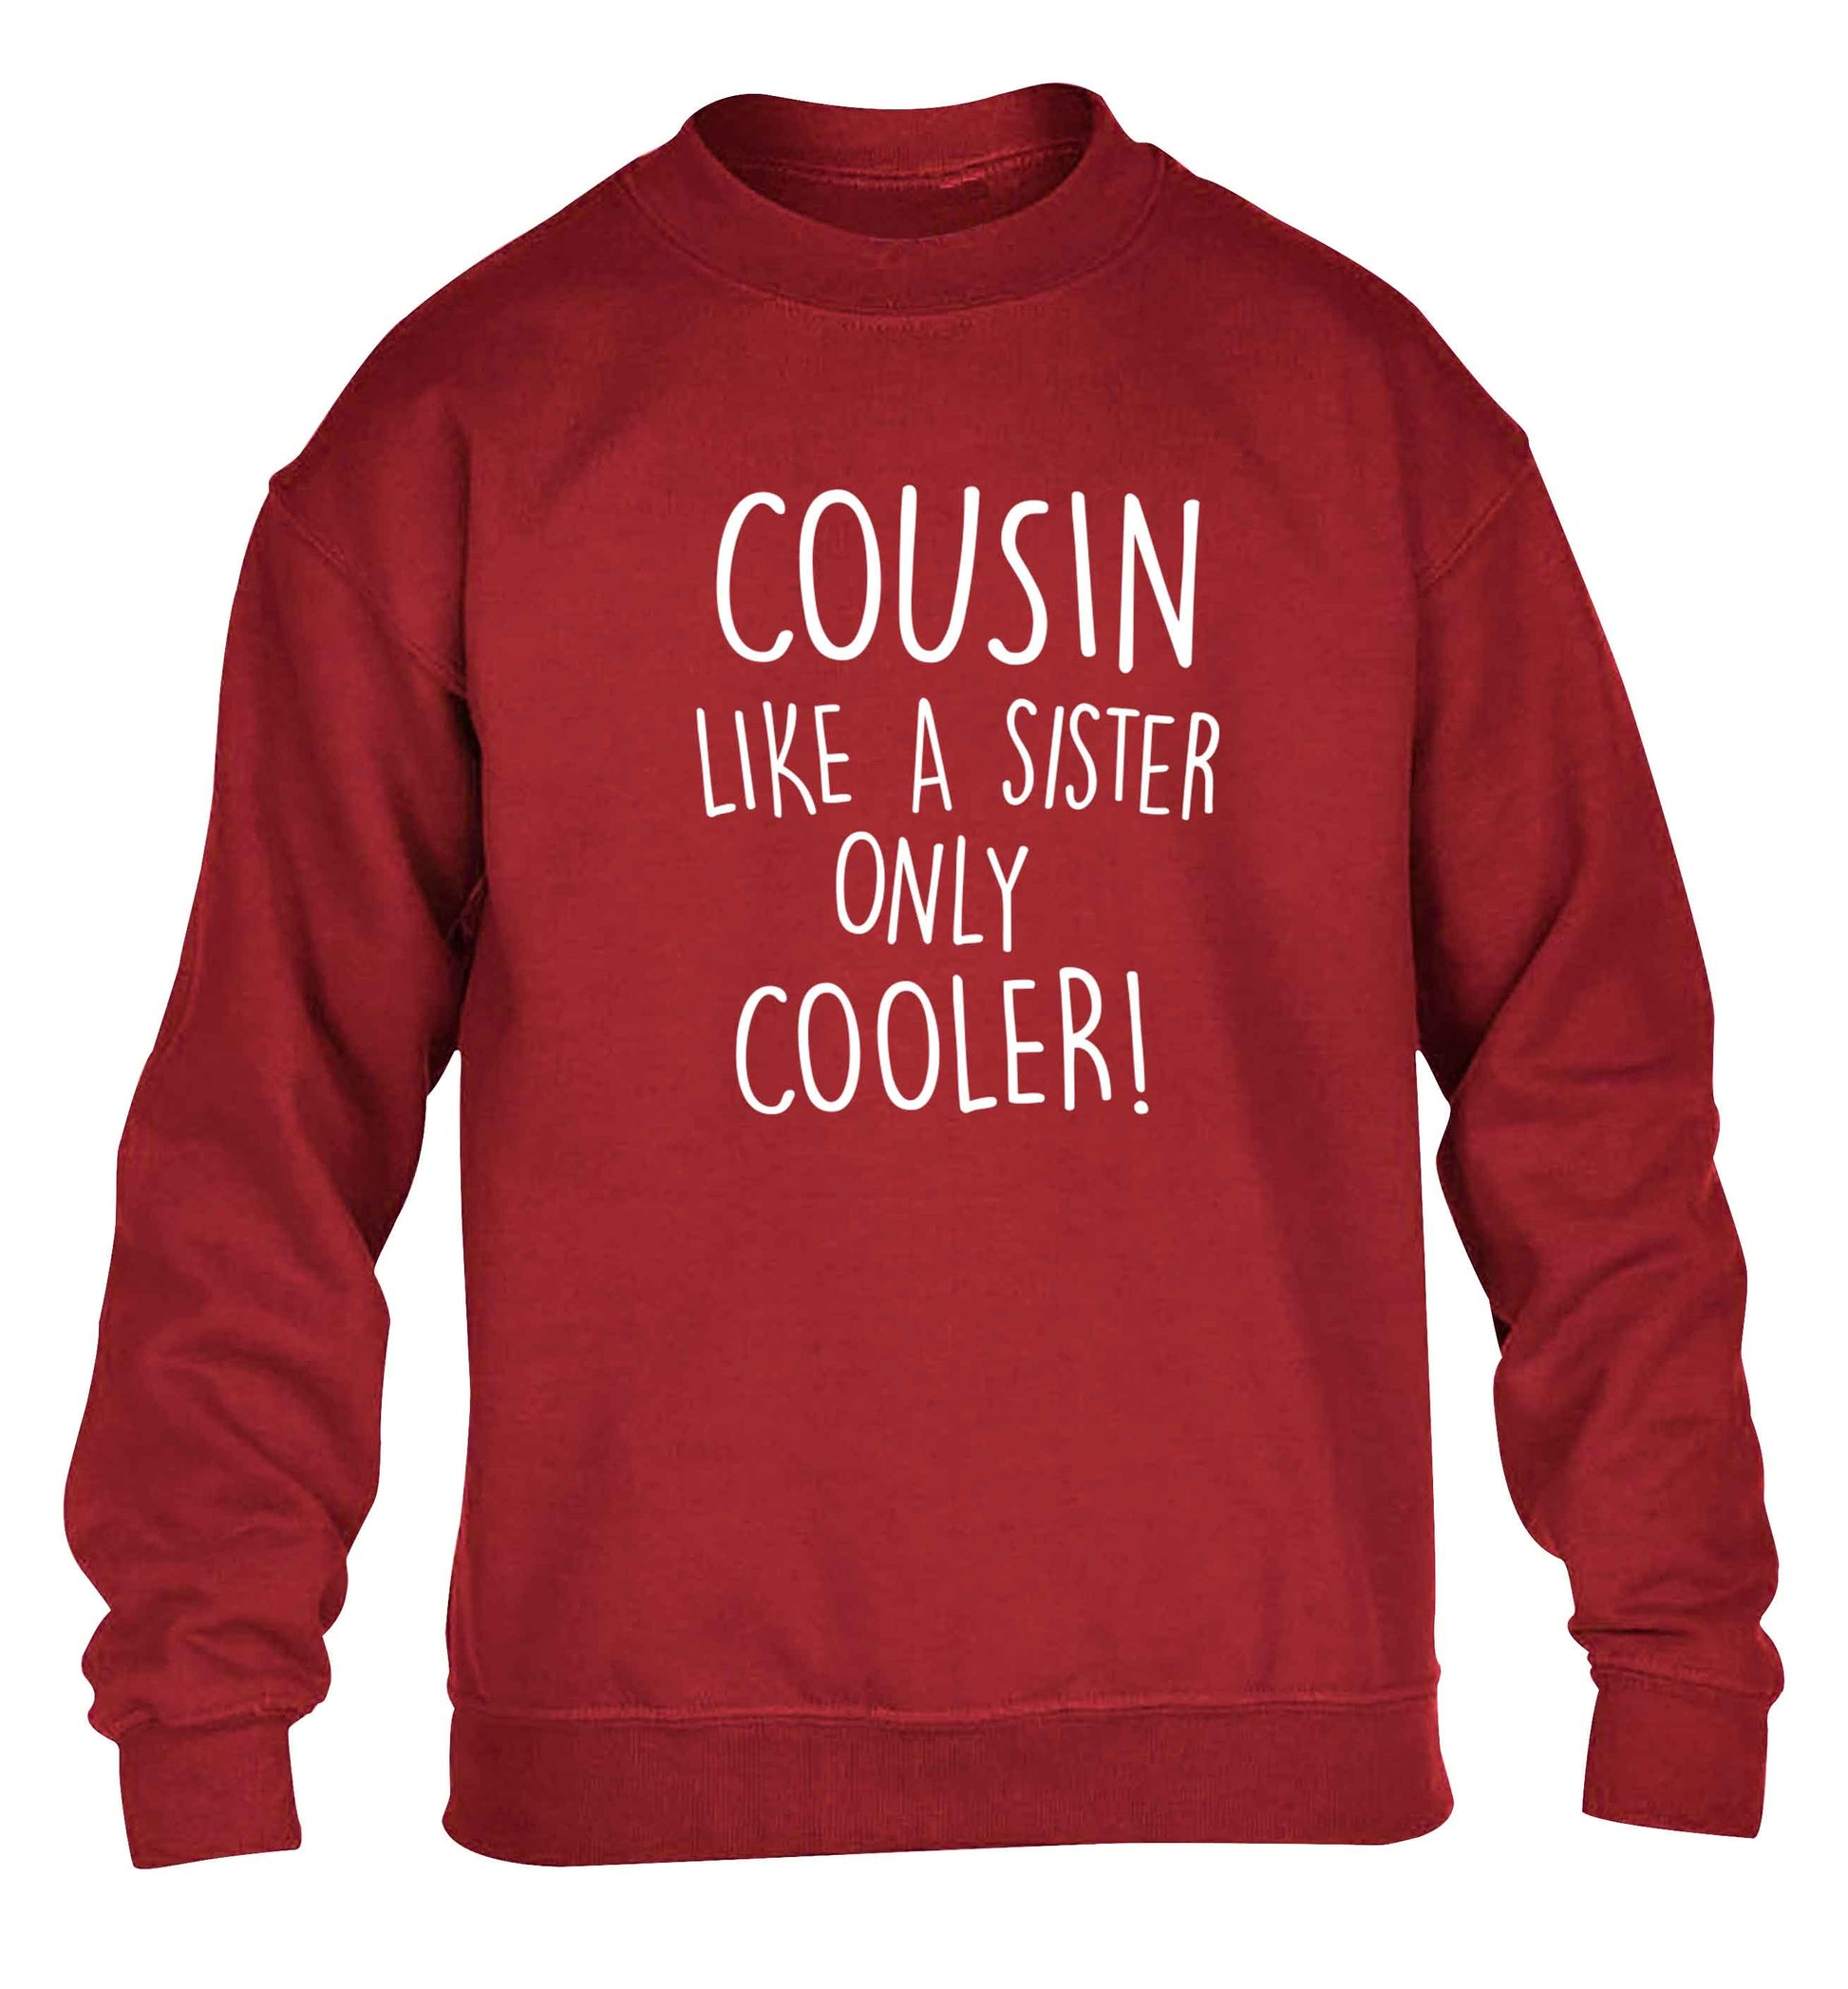 Cousin like a sister only cooler children's grey sweater 12-13 Years